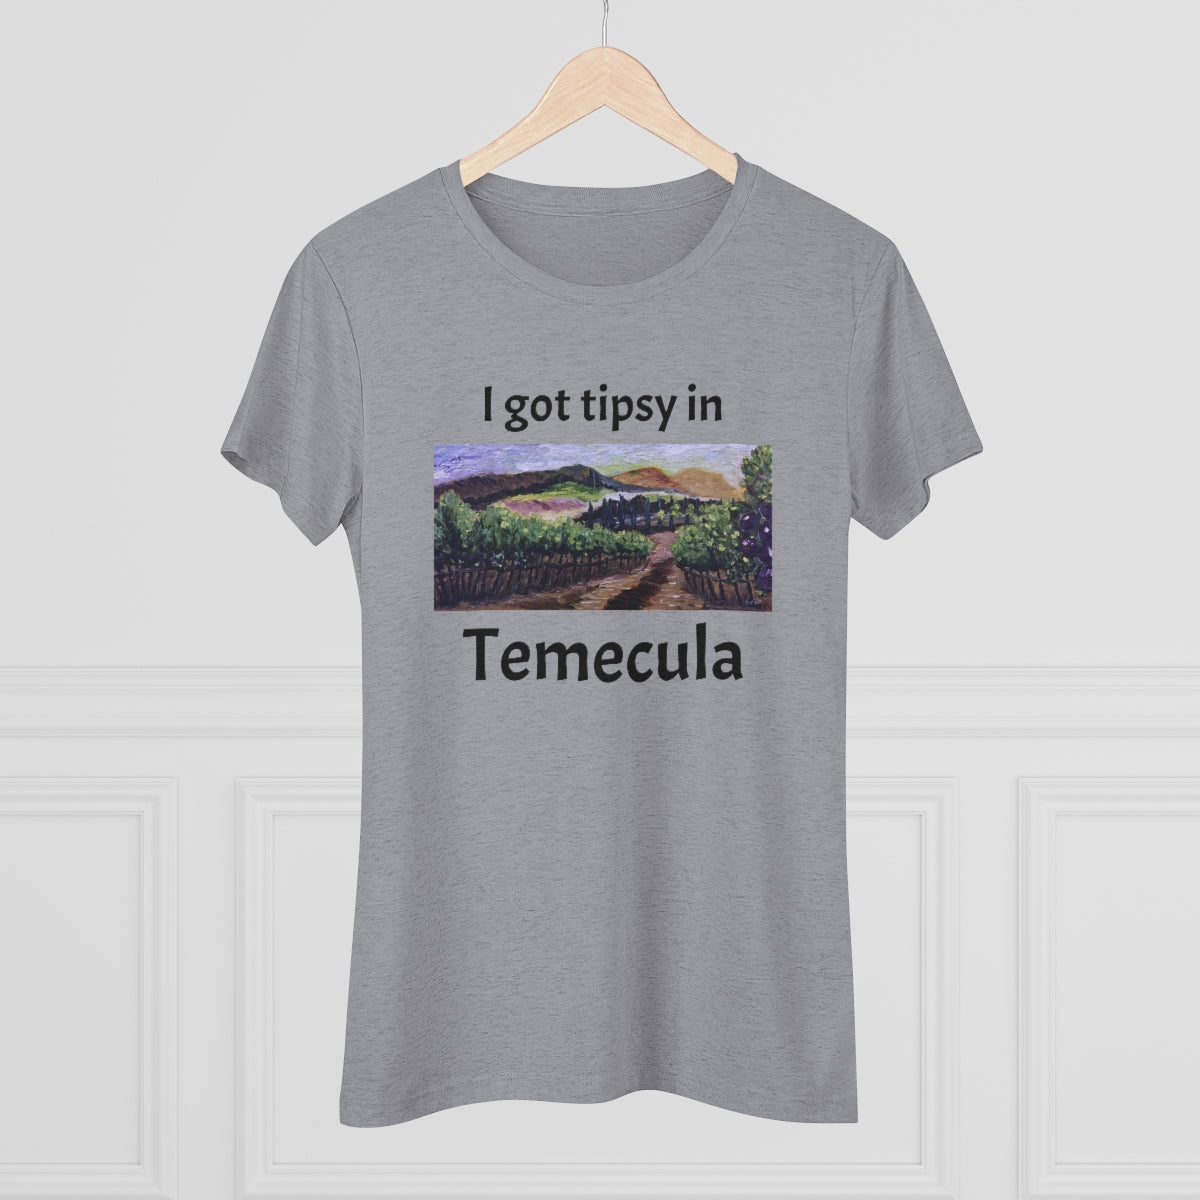 I got tipsy in Temecula Women's fitted Triblend Tee Temecula tee shirt souvenir "Afternoon Vines"